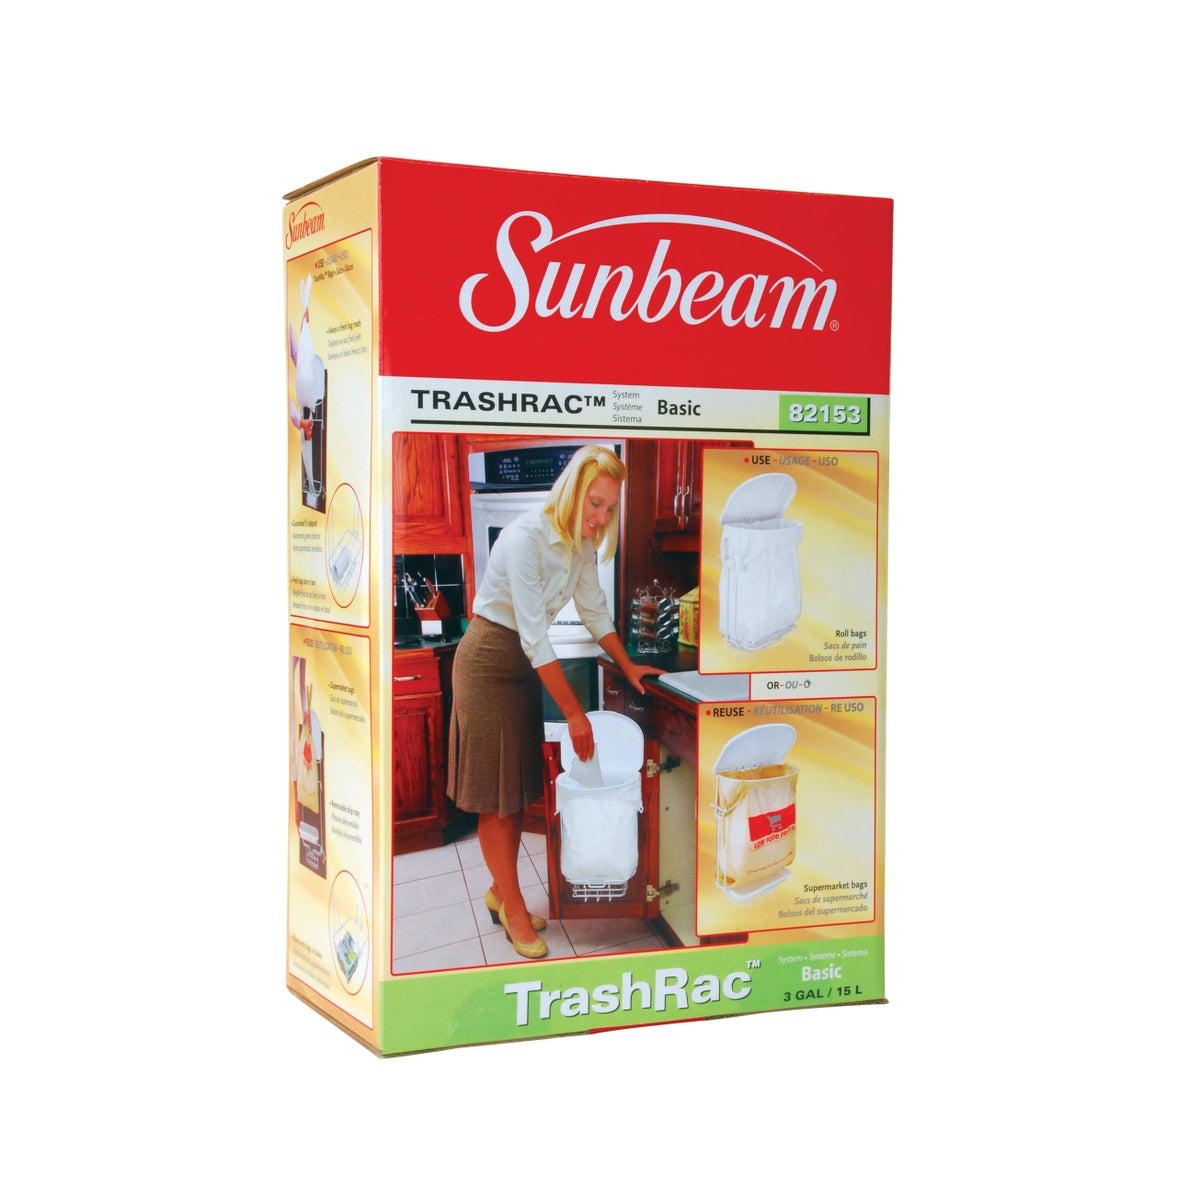 Buy sunbeam trashrac 3 gallon - Online store for storage & organizers, accessories in USA, on sale, low price, discount deals, coupon code